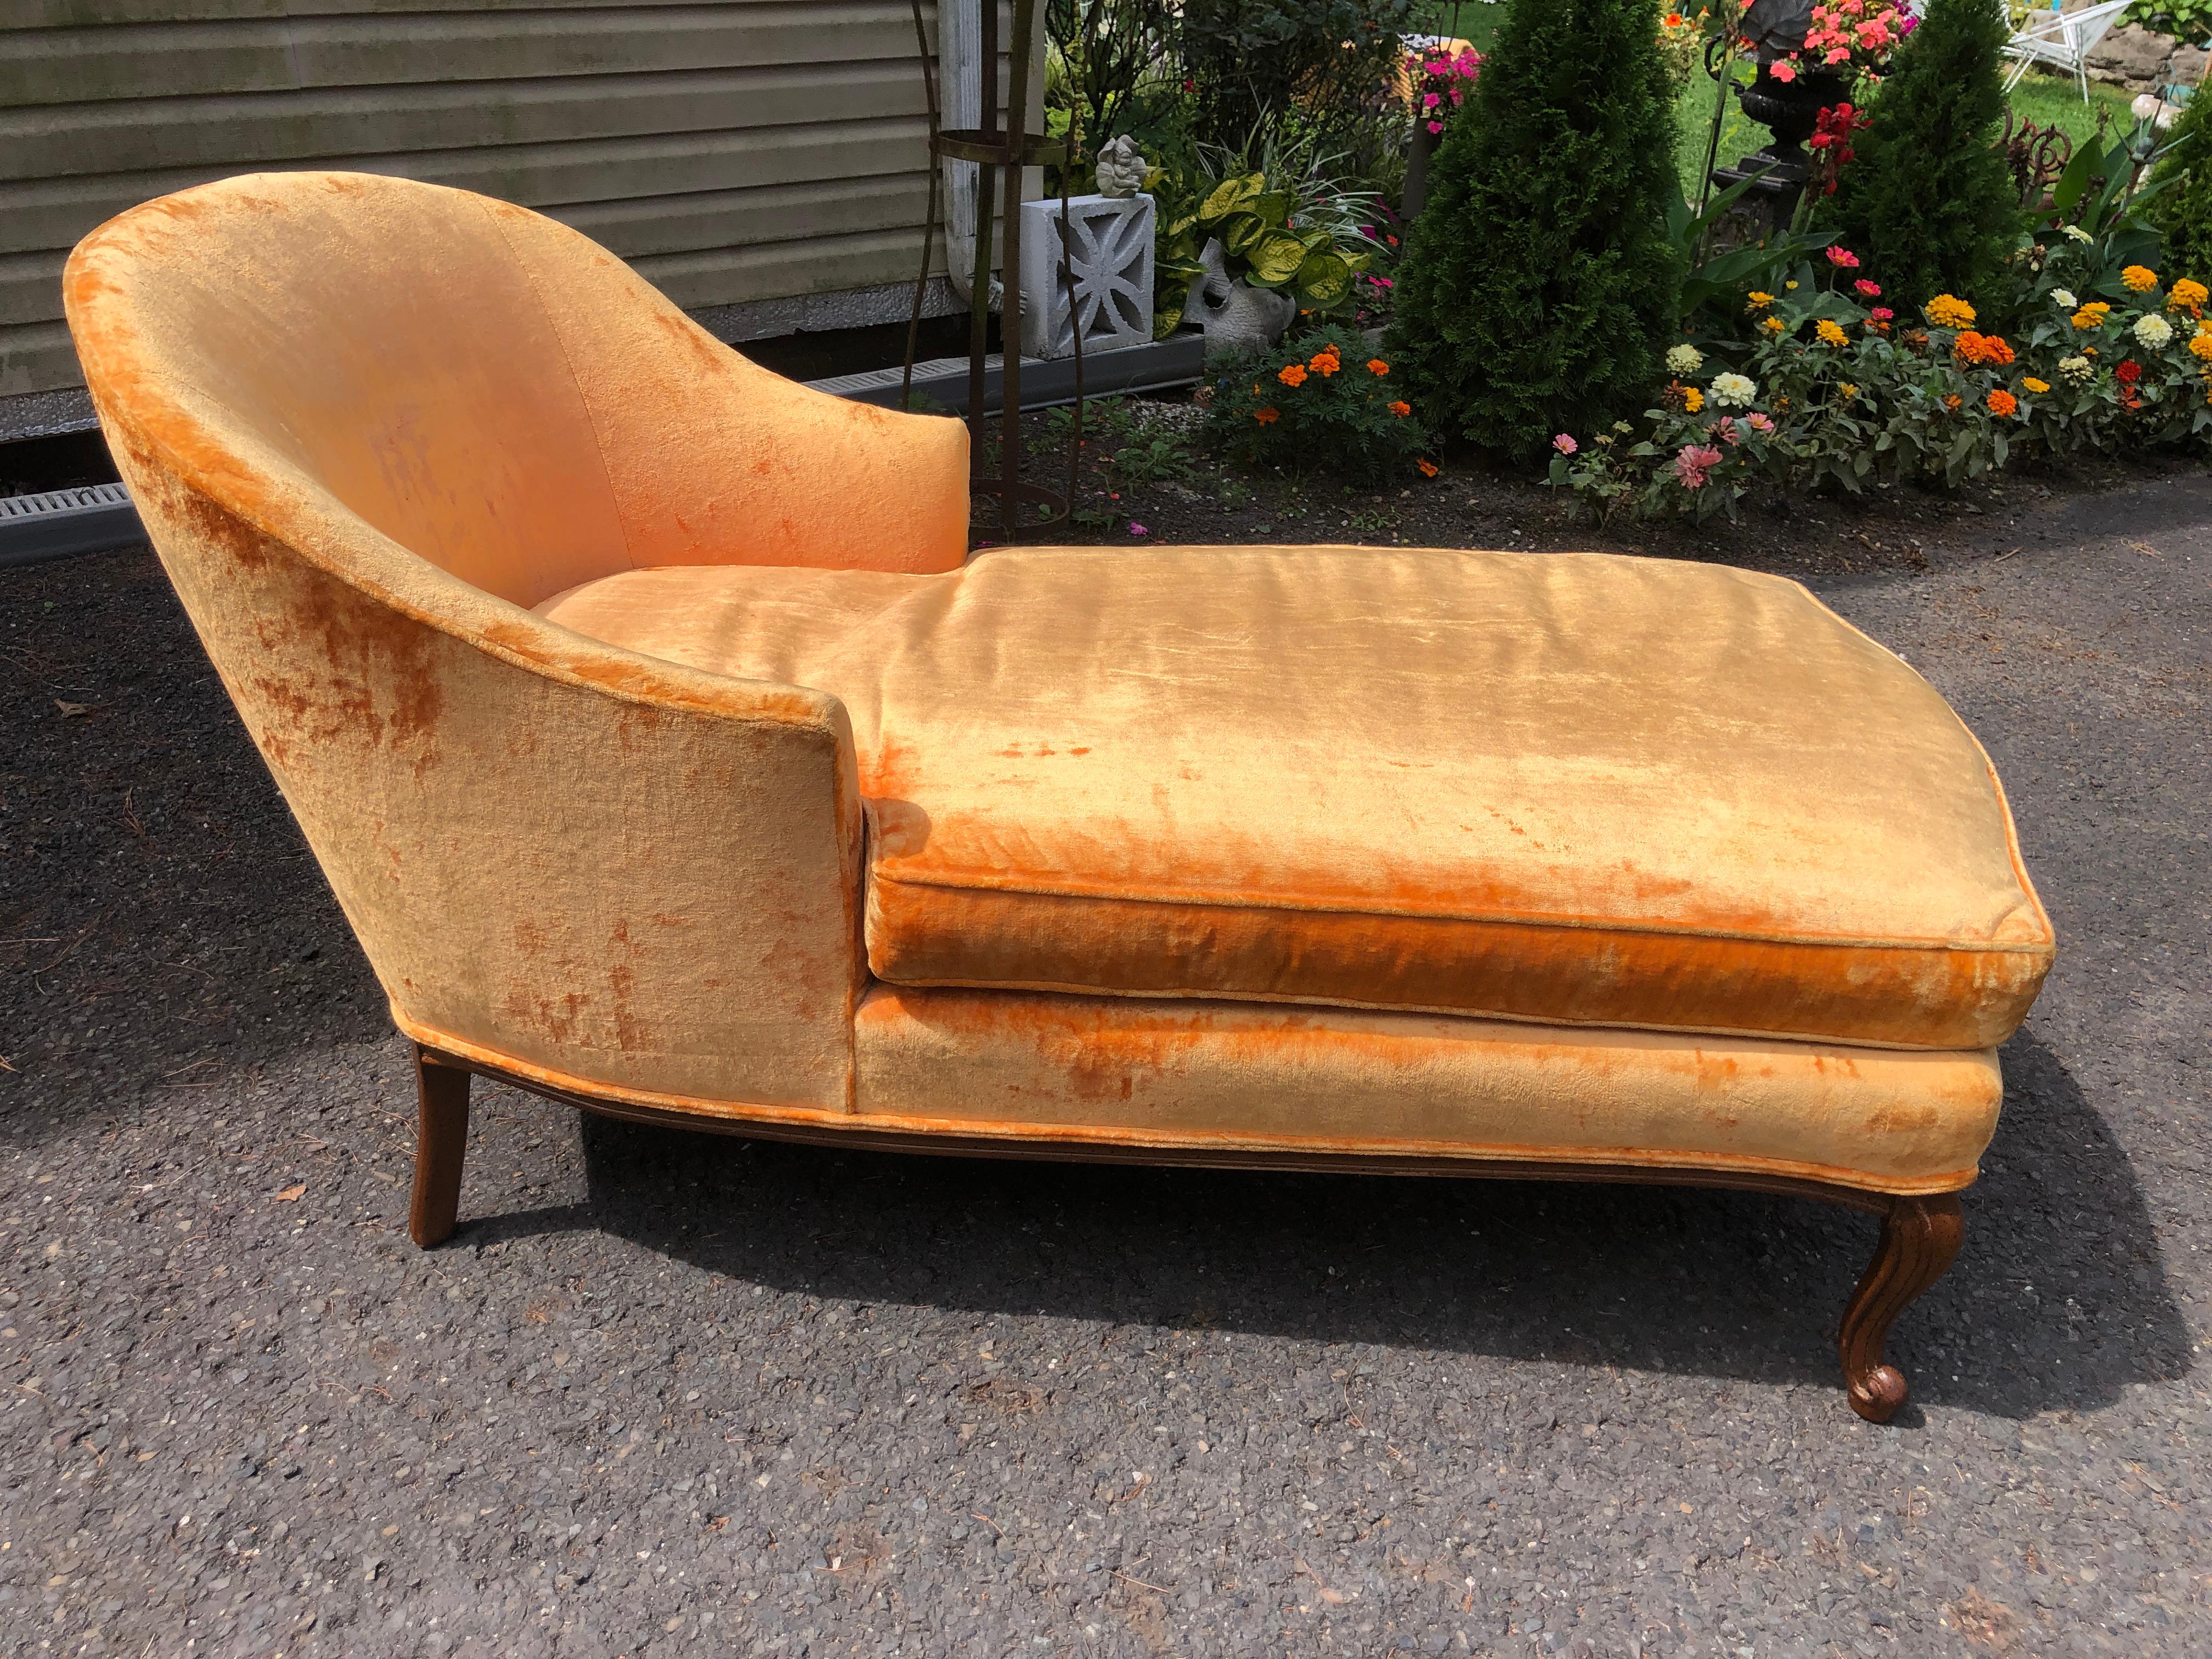 Sensational Petite French Provincial Chaise Lounge Mid-Century  For Sale 2